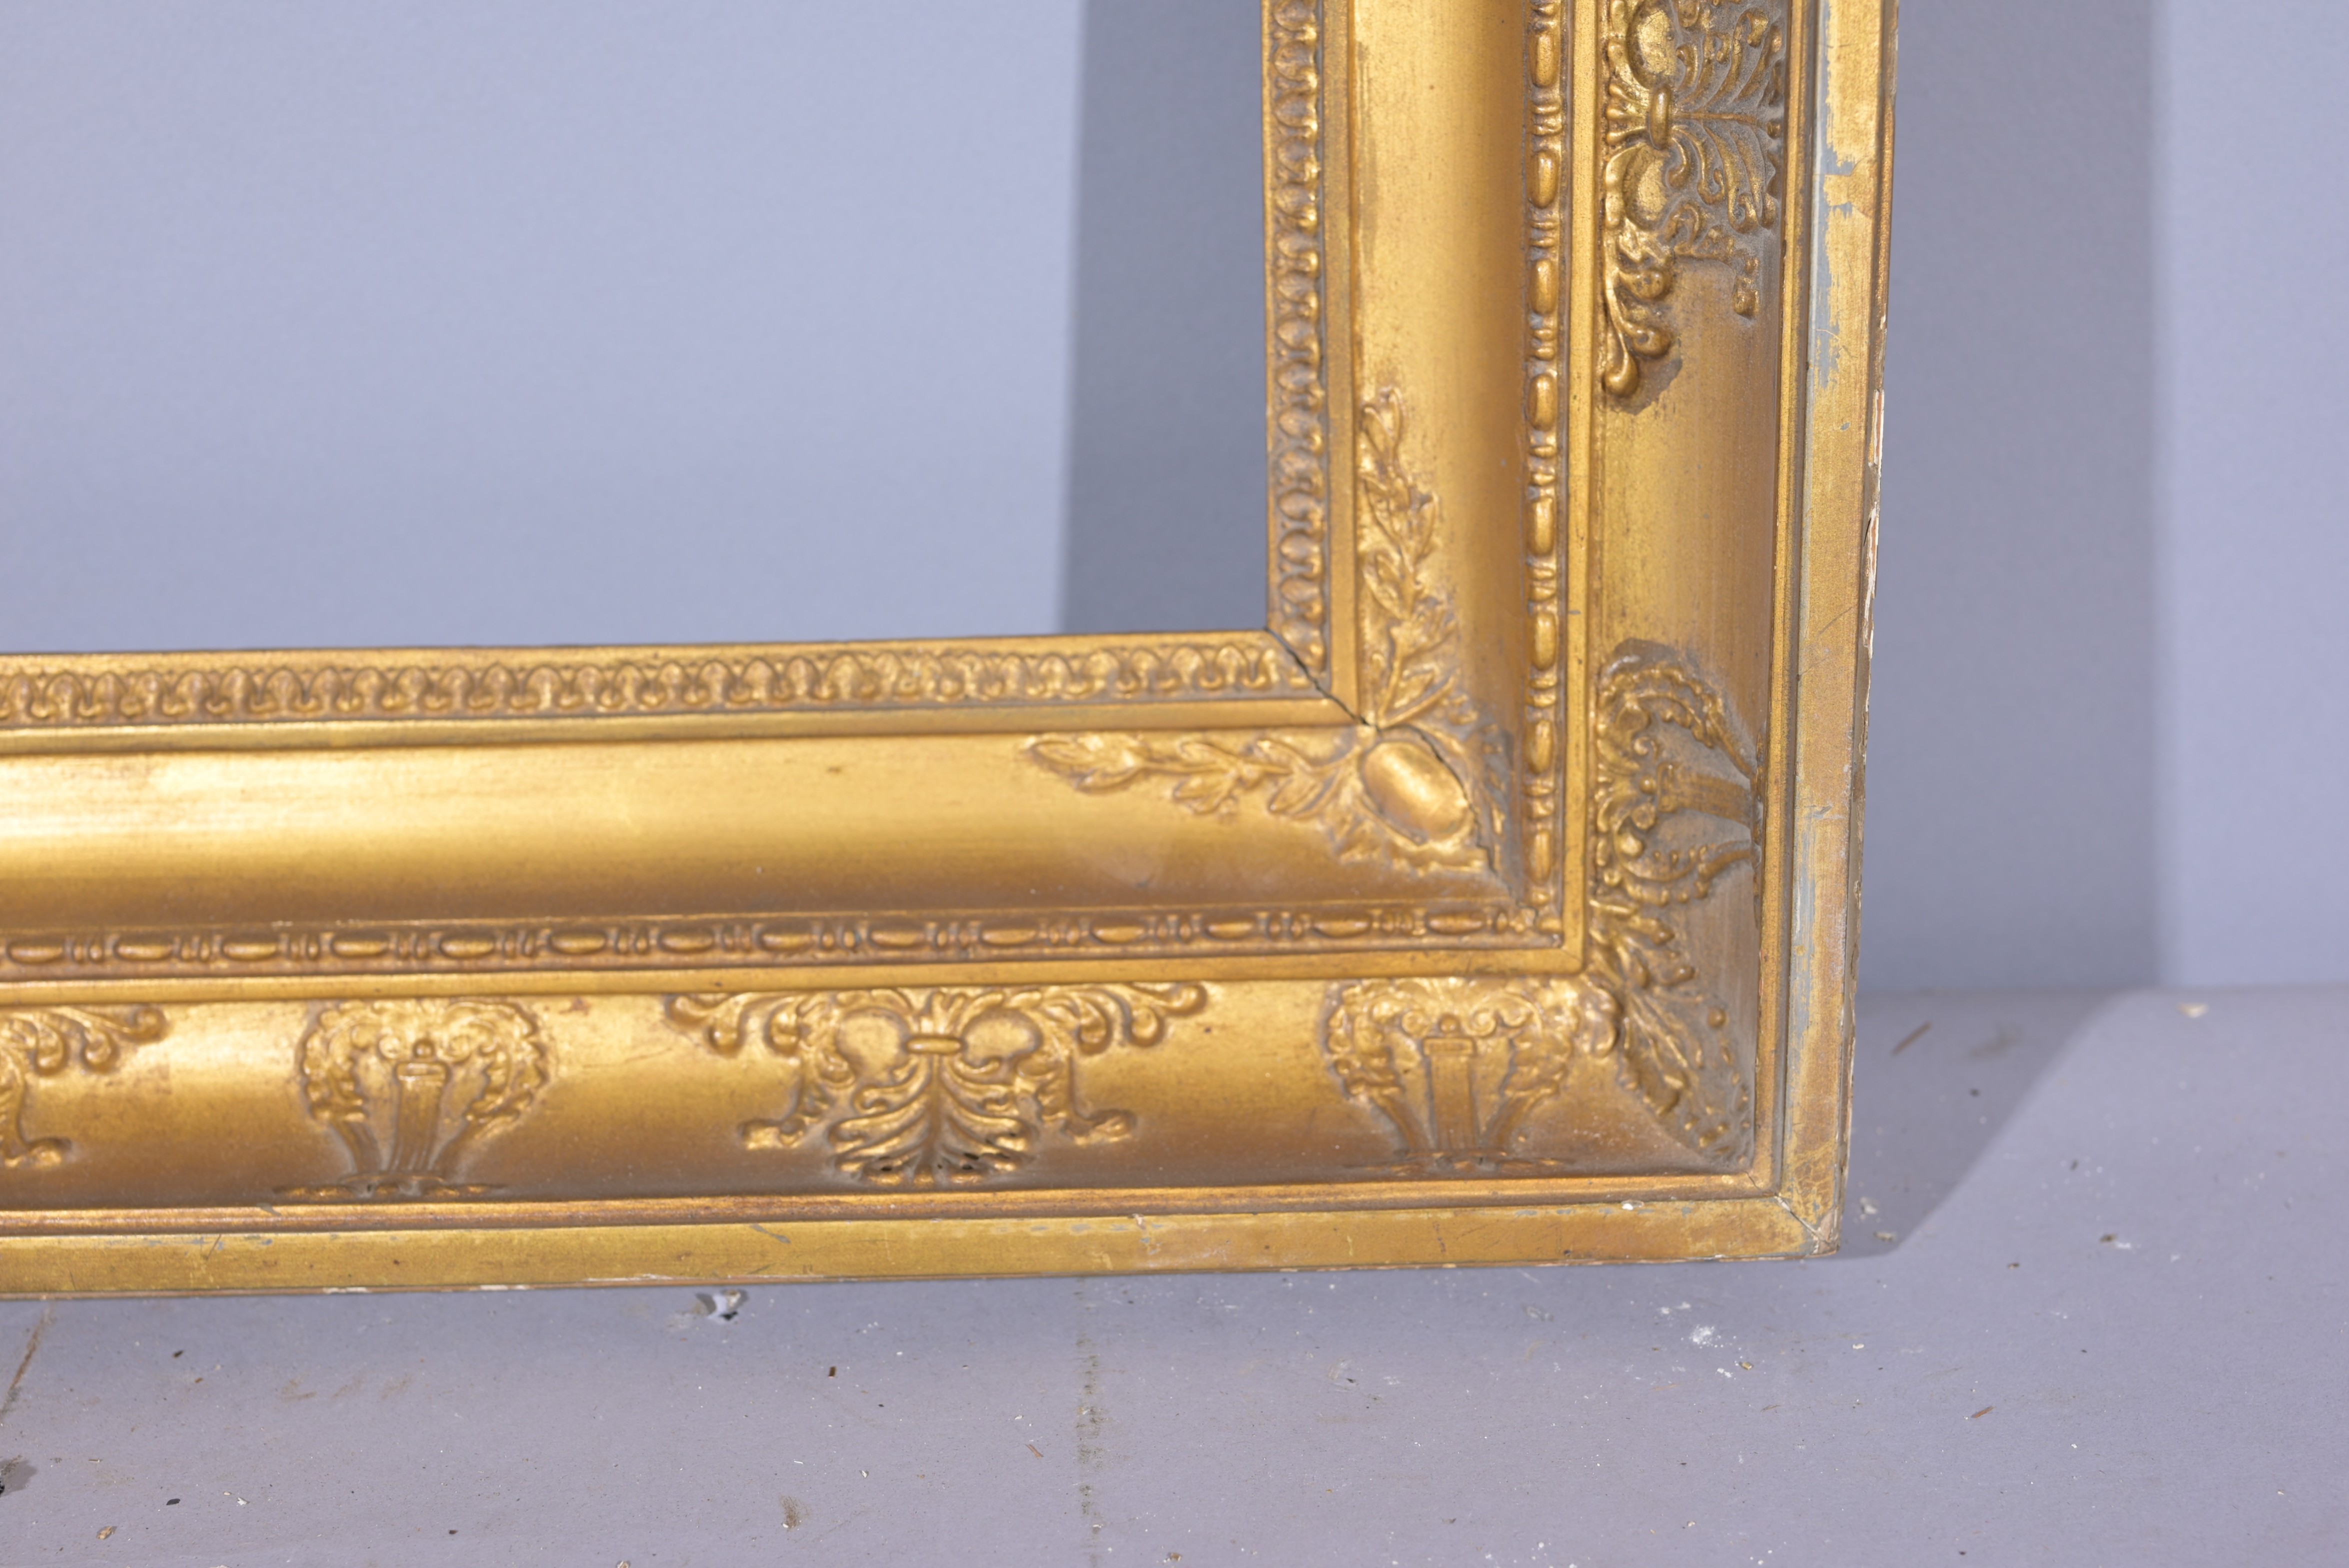 Ameican Gilt/Wood Frame- 16 x 13 - Image 4 of 7